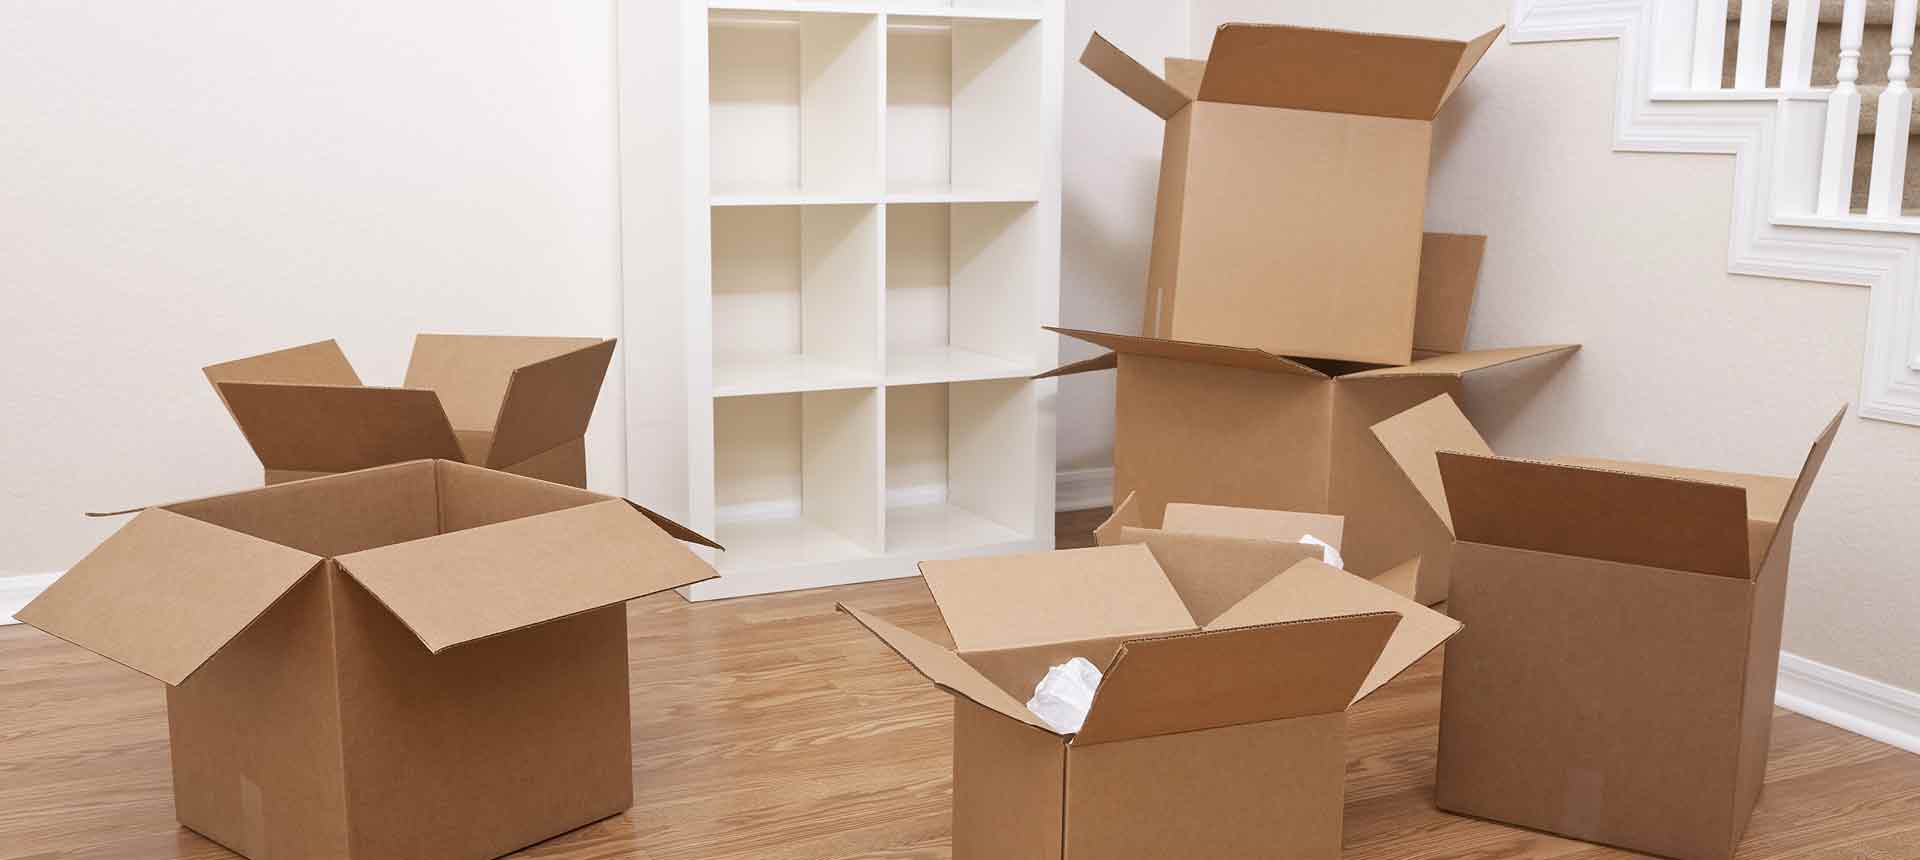 Movers and Packers Beckenham Bromley Croydon Casey's Removals